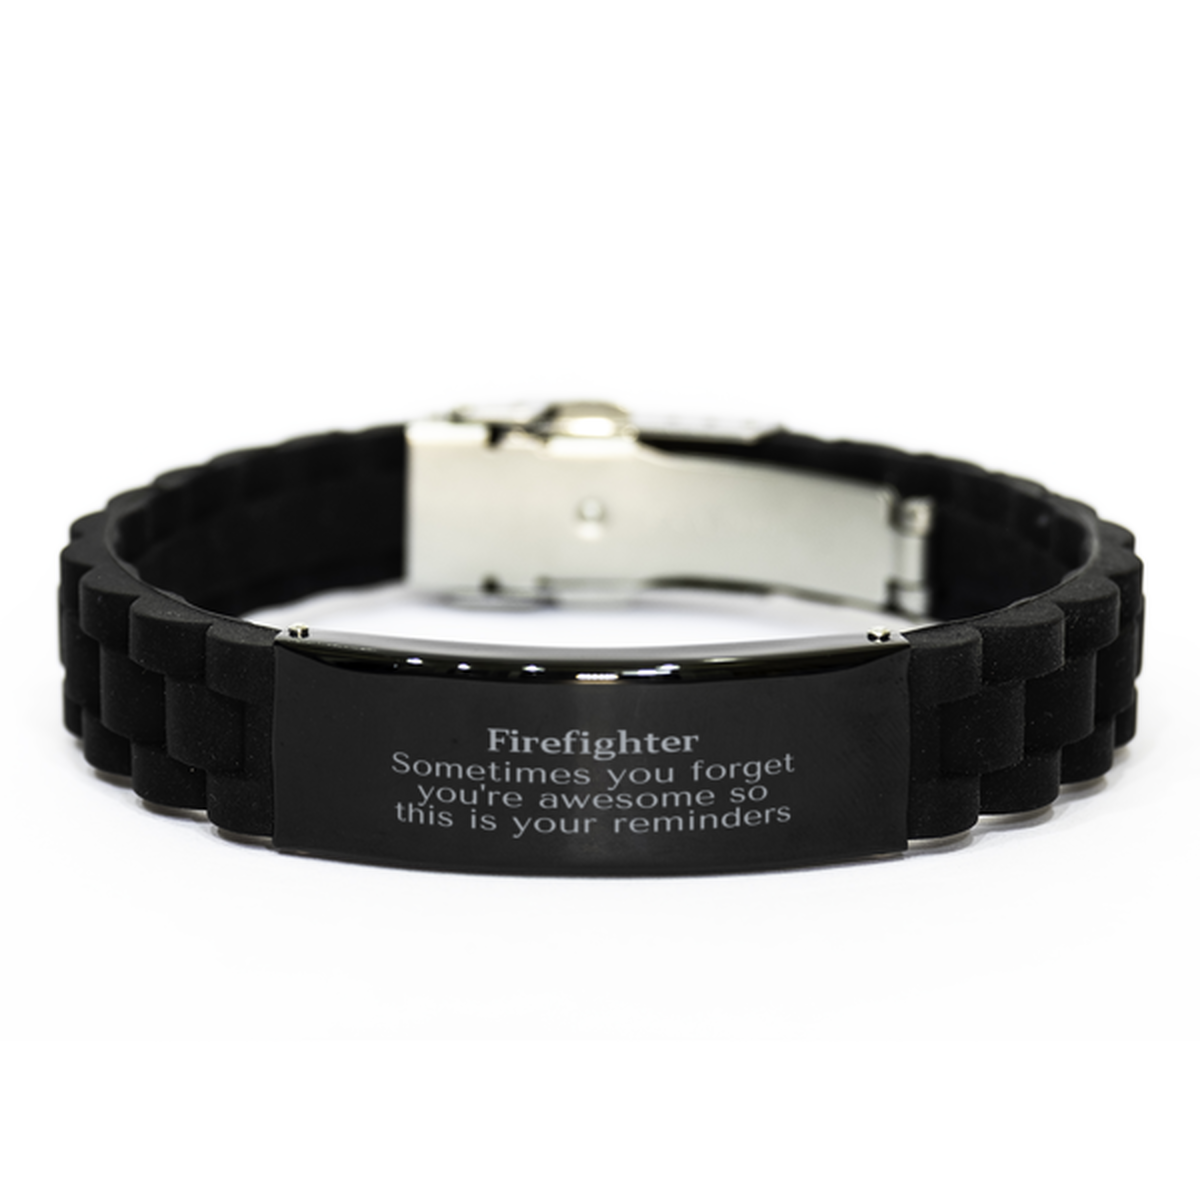 Sentimental Firefighter Black Glidelock Clasp Bracelet, Firefighter Sometimes you forget you're awesome so this is your reminders, Graduation Christmas Birthday Gifts for Firefighter, Men, Women, Coworkers